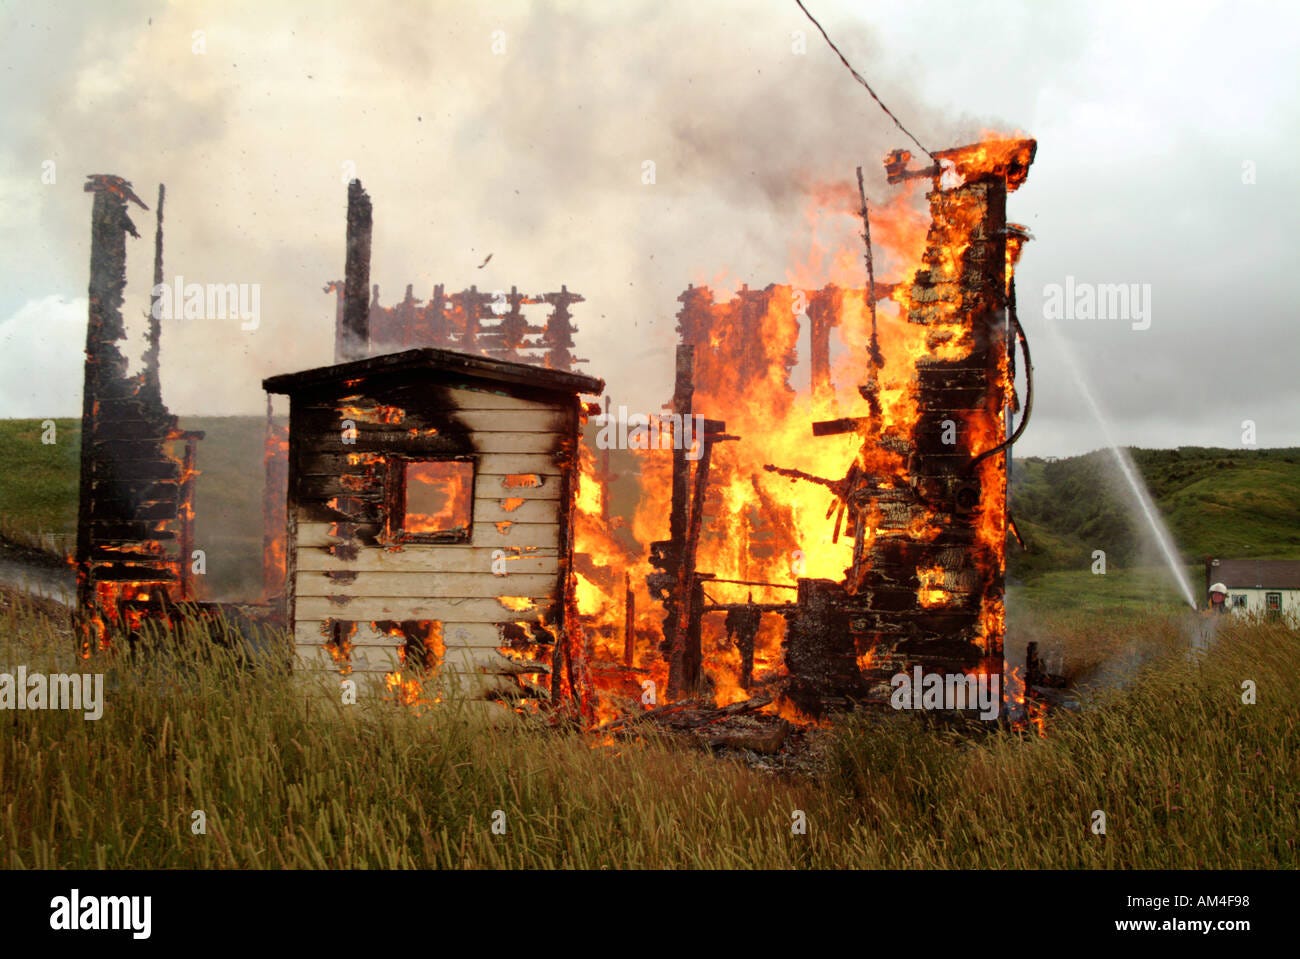 A small house on fire burning to the ground Stock Photo - Alamy